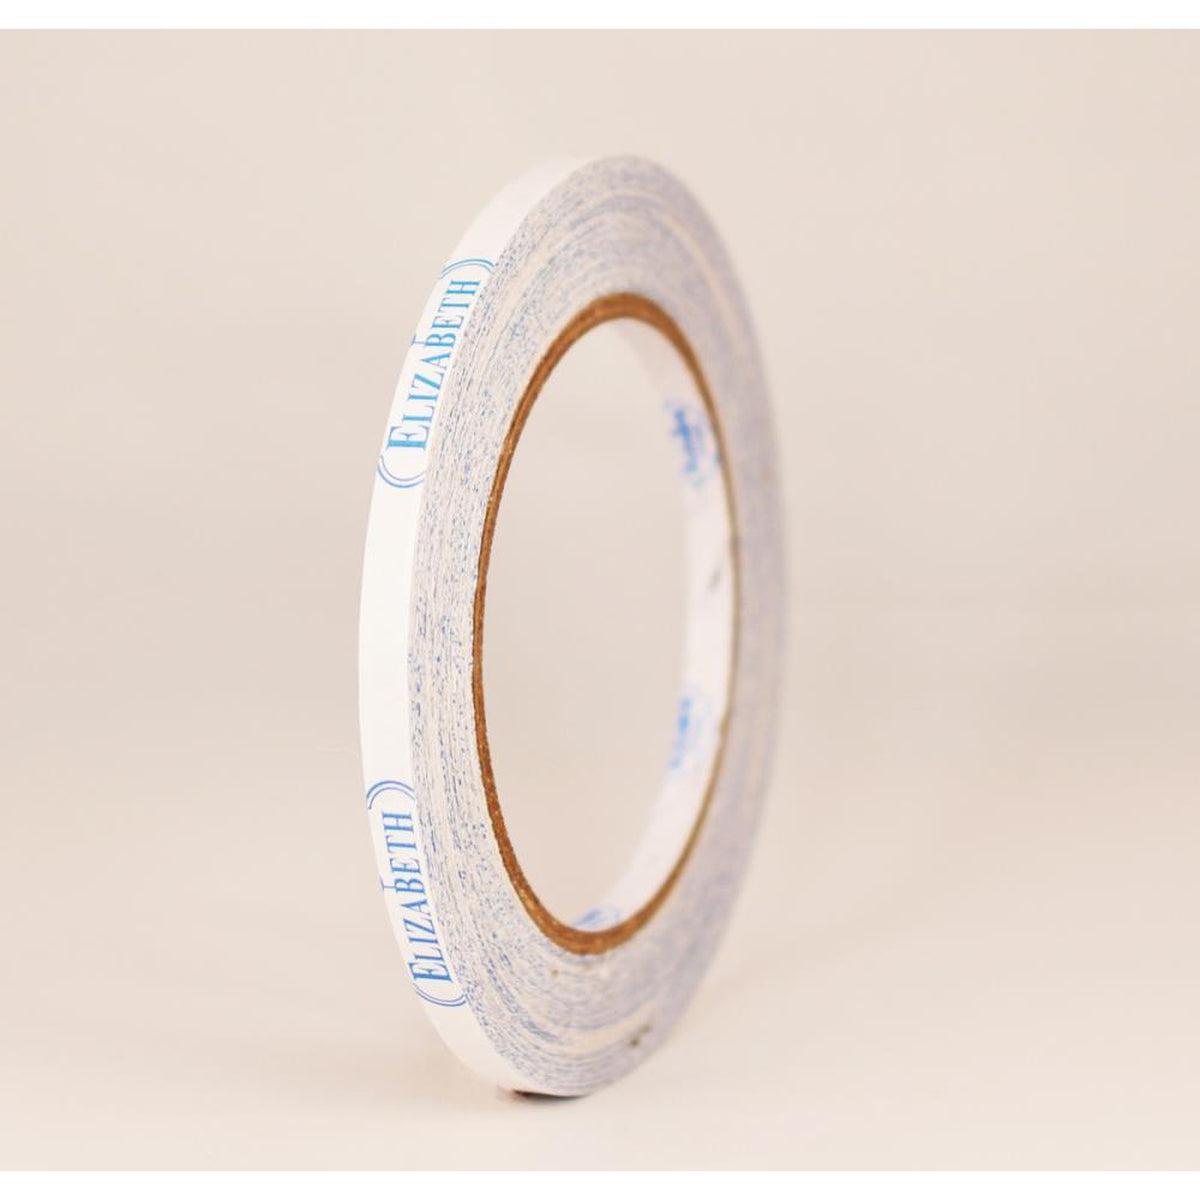 Double Sided Tape - Clear